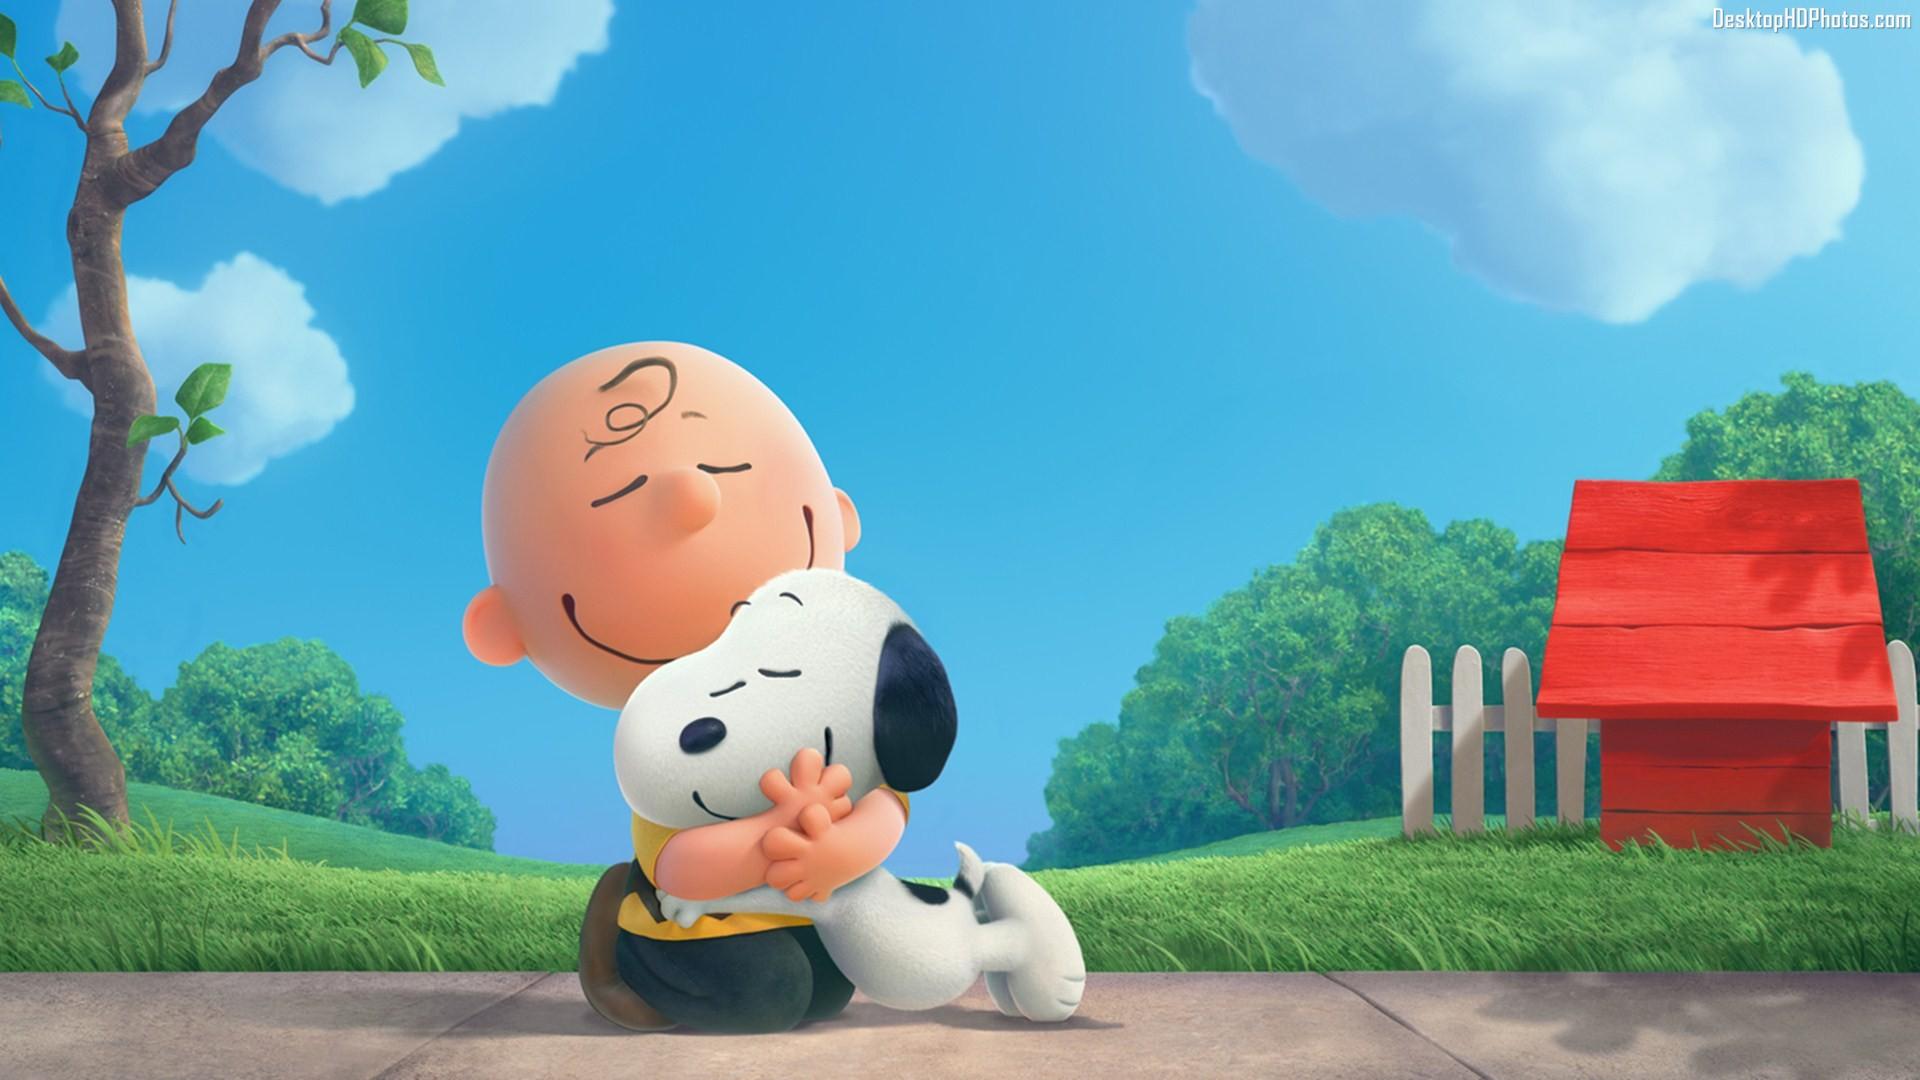 Movie of the week: buy the children's production “Snoopy & Charlie Brown - Peanuts, O Filme” for R $ 9.90!